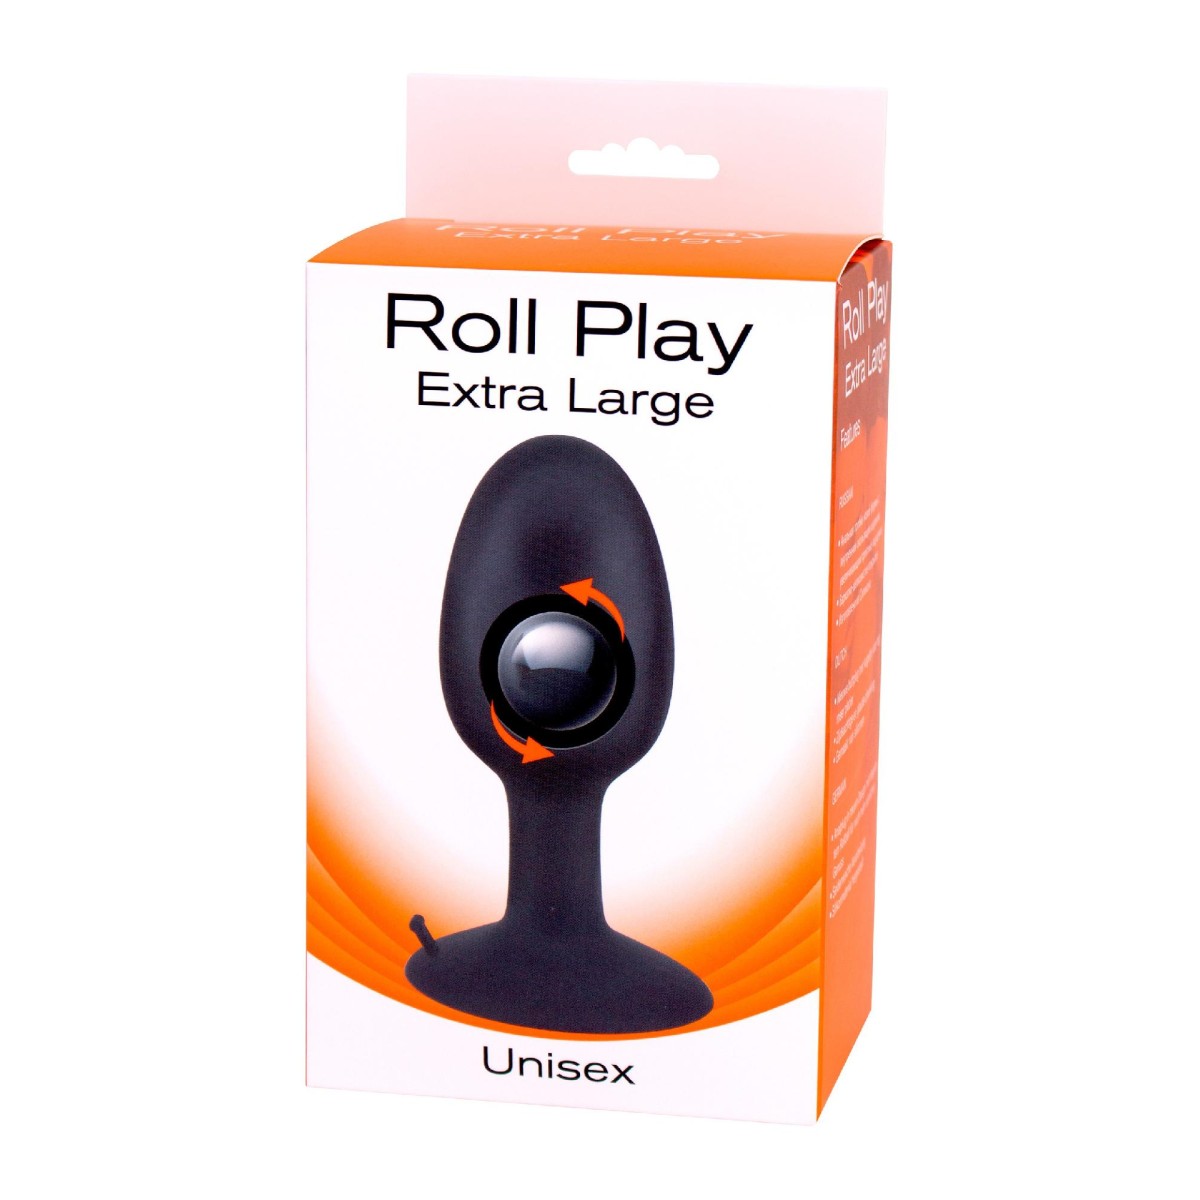 Plug anale con ventosa in silicone Roll Play Extra Large